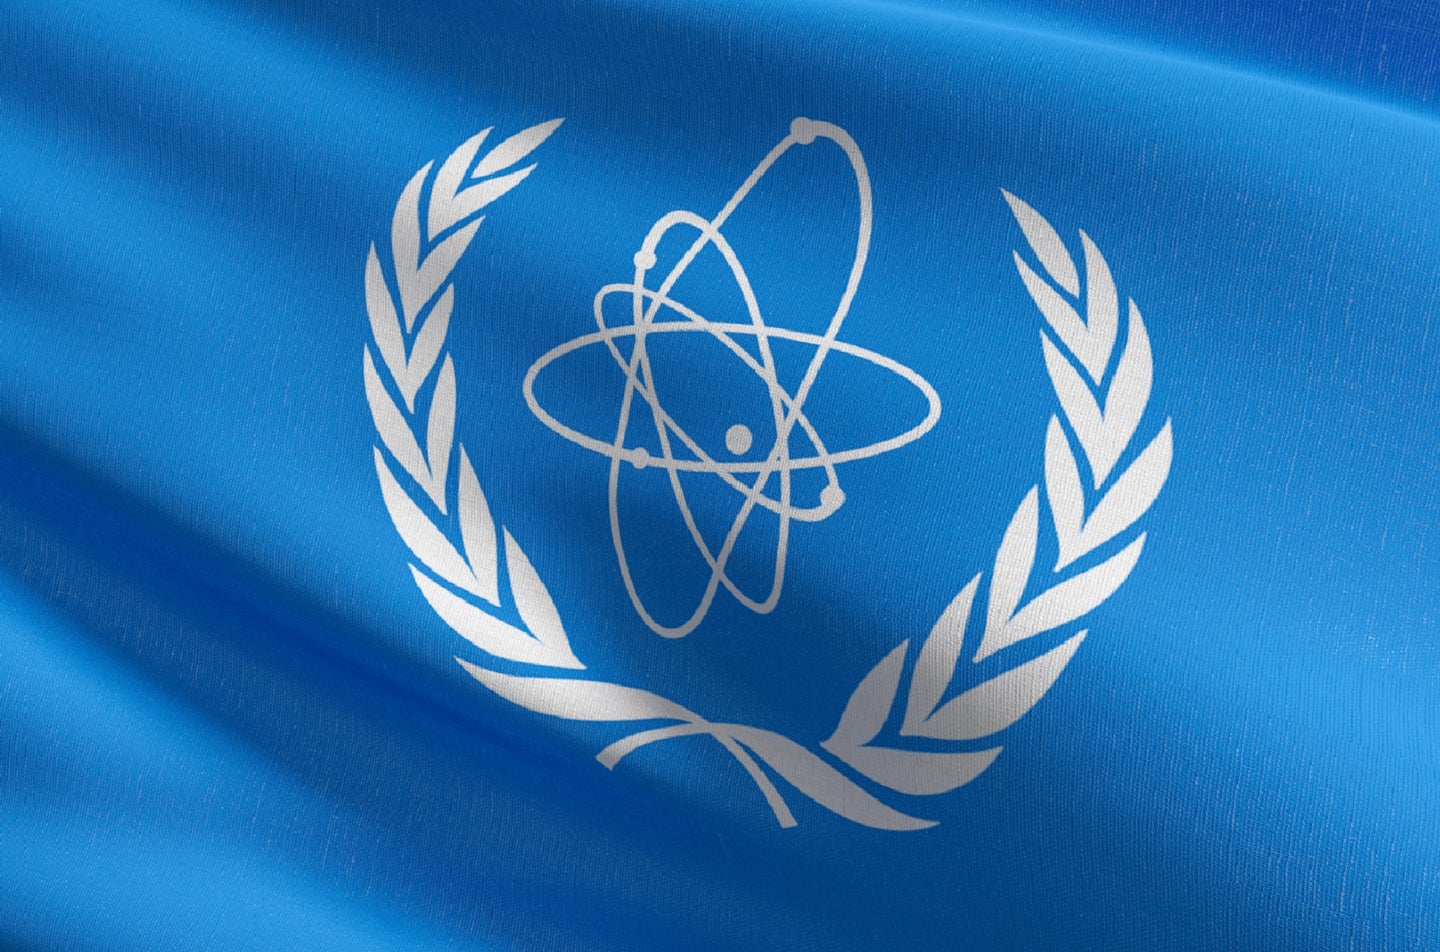 Light blue flag with IEAE nuclear energy logo in middle in white